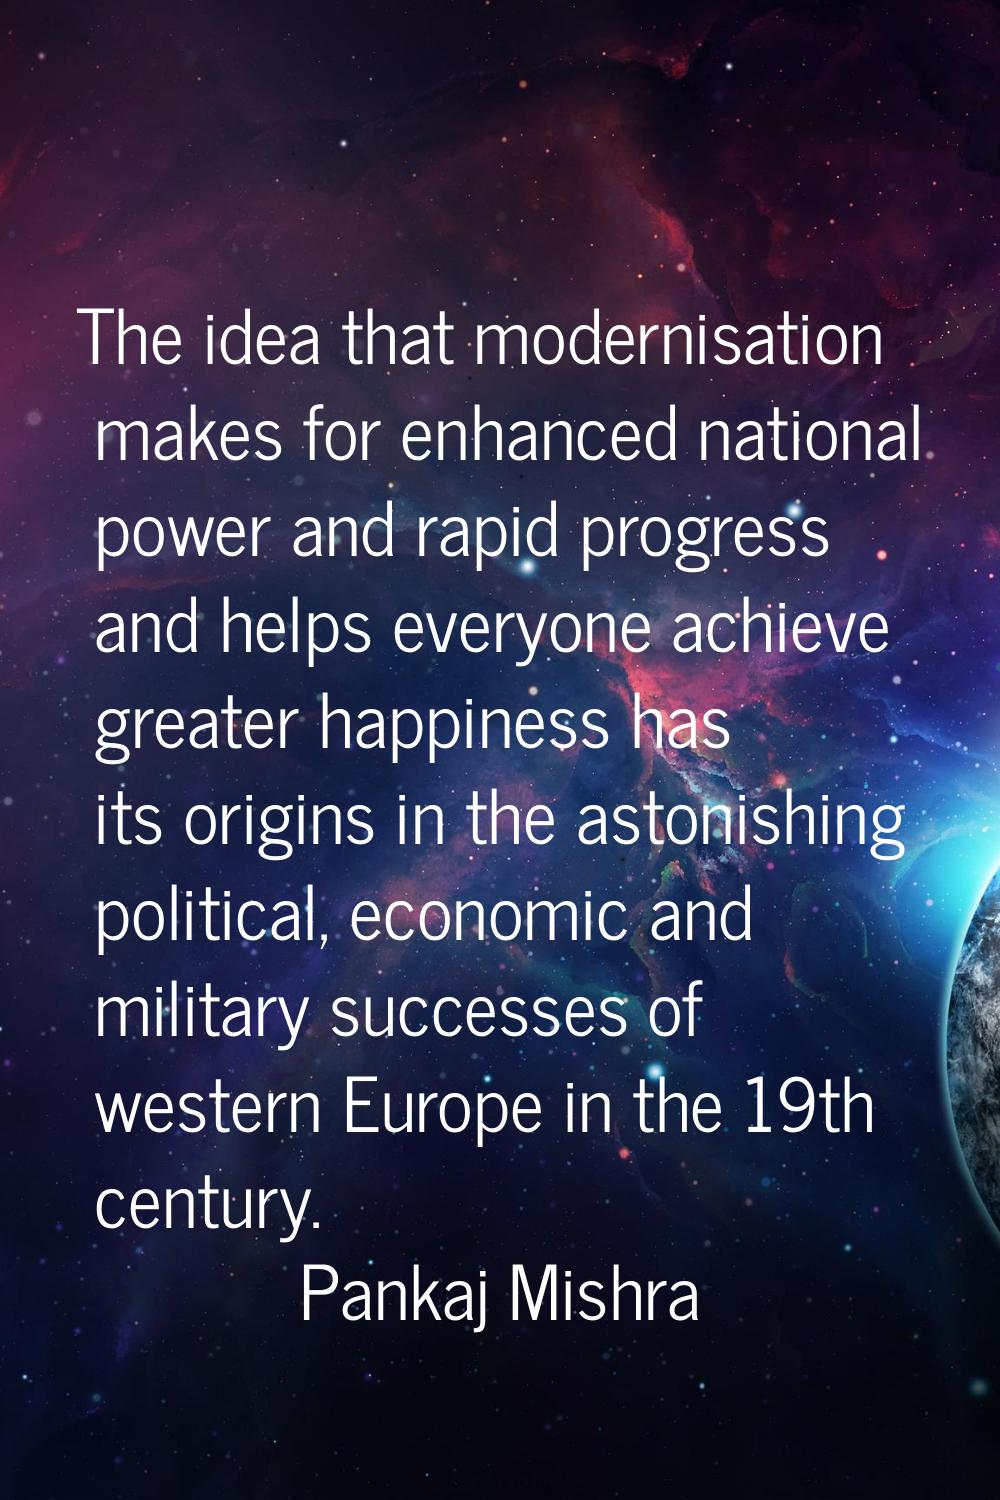 The idea that modernisation makes for enhanced national power and rapid progress and helps everyone